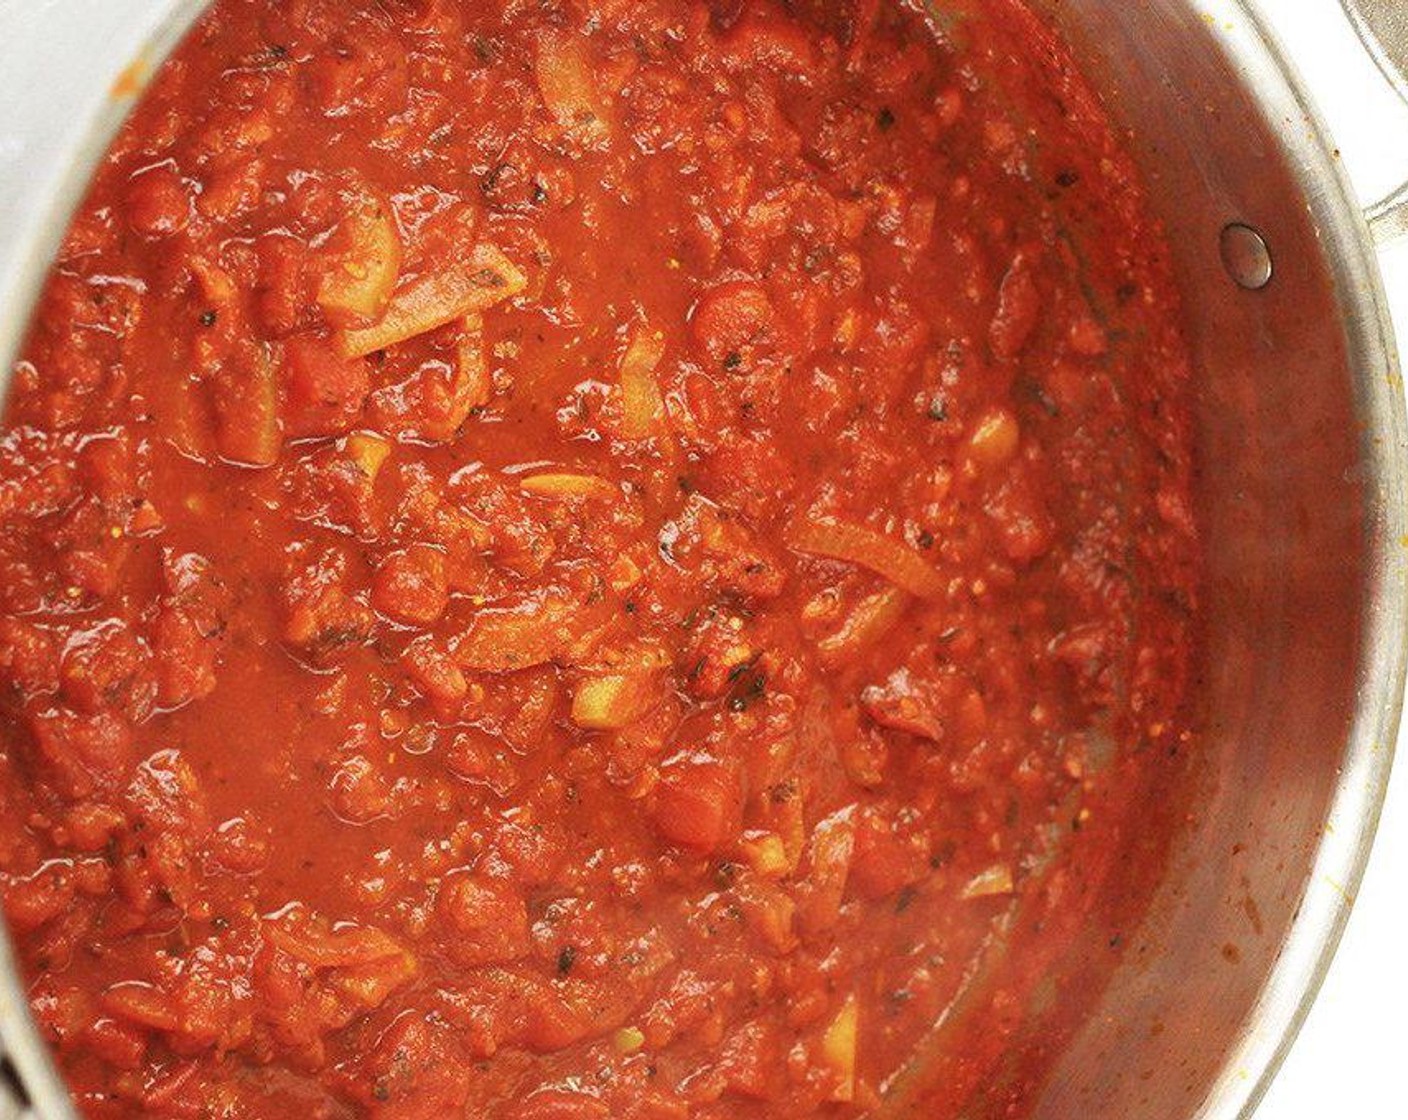 step 4 Add in Canned Fire Roasted Diced Tomatoes (3 1/2 cups), Tomato Sauce (1 3/4 cups), Sea Salt (1/2 tsp), Dried Oregano (1 tsp), Dried Thyme (1 tsp), Dried Basil (1 tsp), Smoked Paprika (1 tsp), Ground Turmeric (1 tsp), and Brown Sugar (2 Tbsp). Reduce heat to a simmer and allow to cook 10 minutes more, stirring occasionally. Taste and add salt to taste.